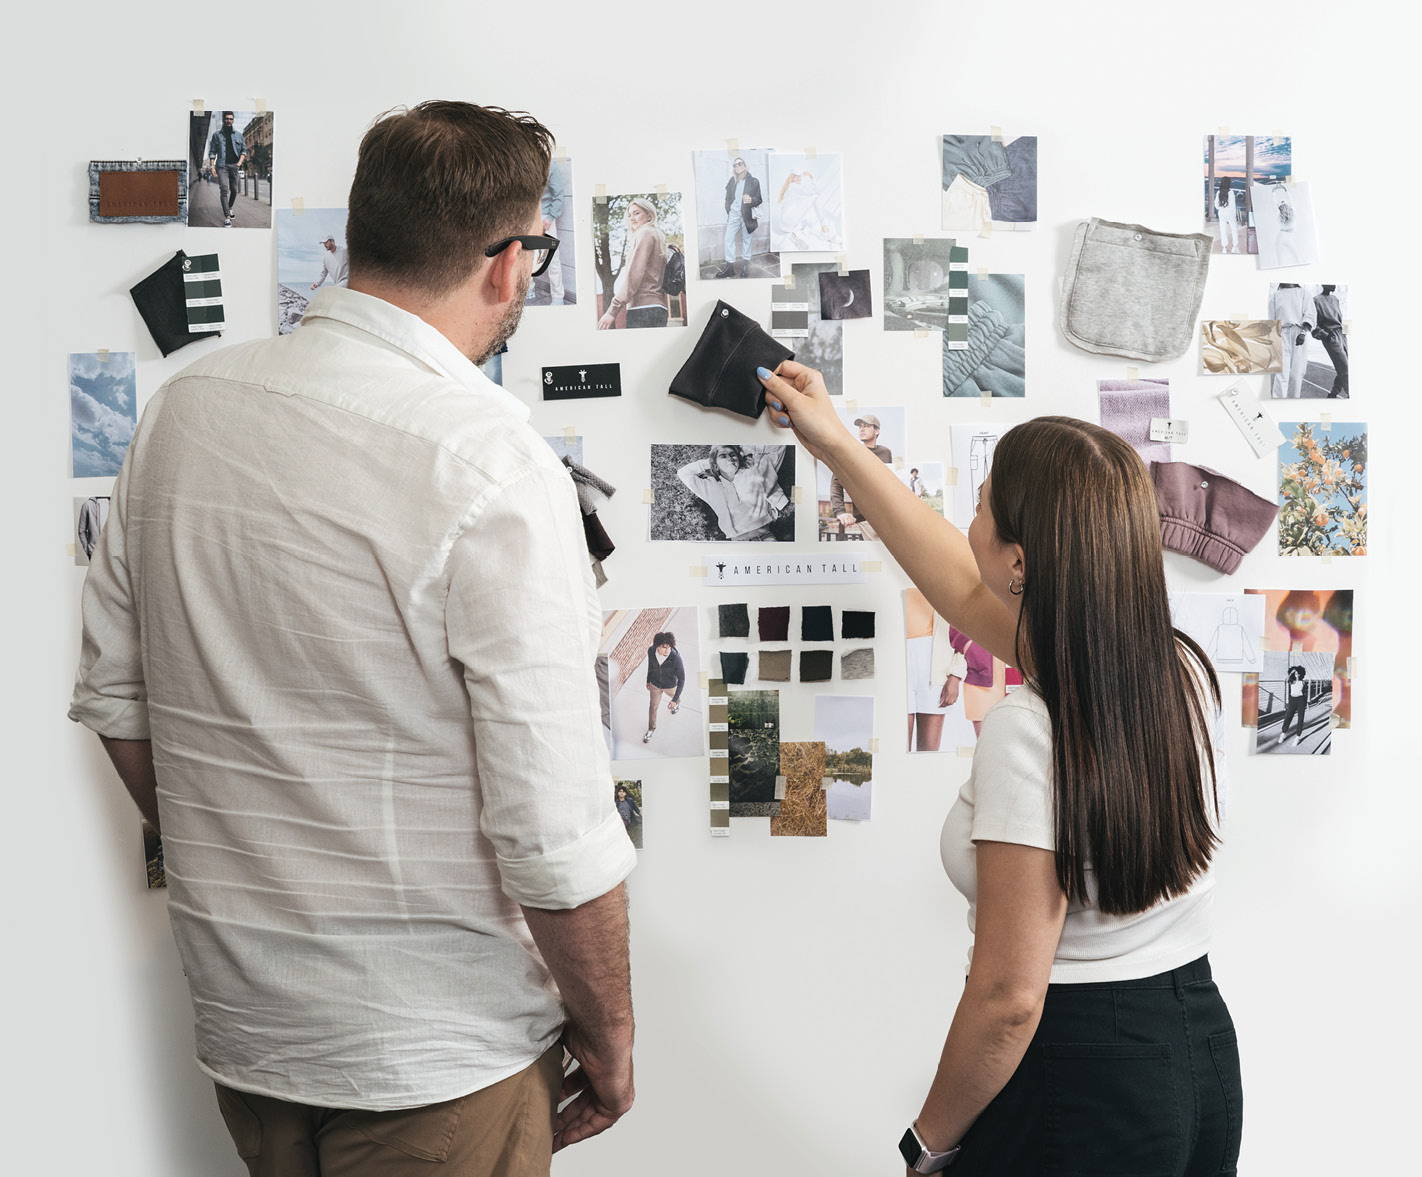 Two employees looking at fabric swatches and photos on the wall